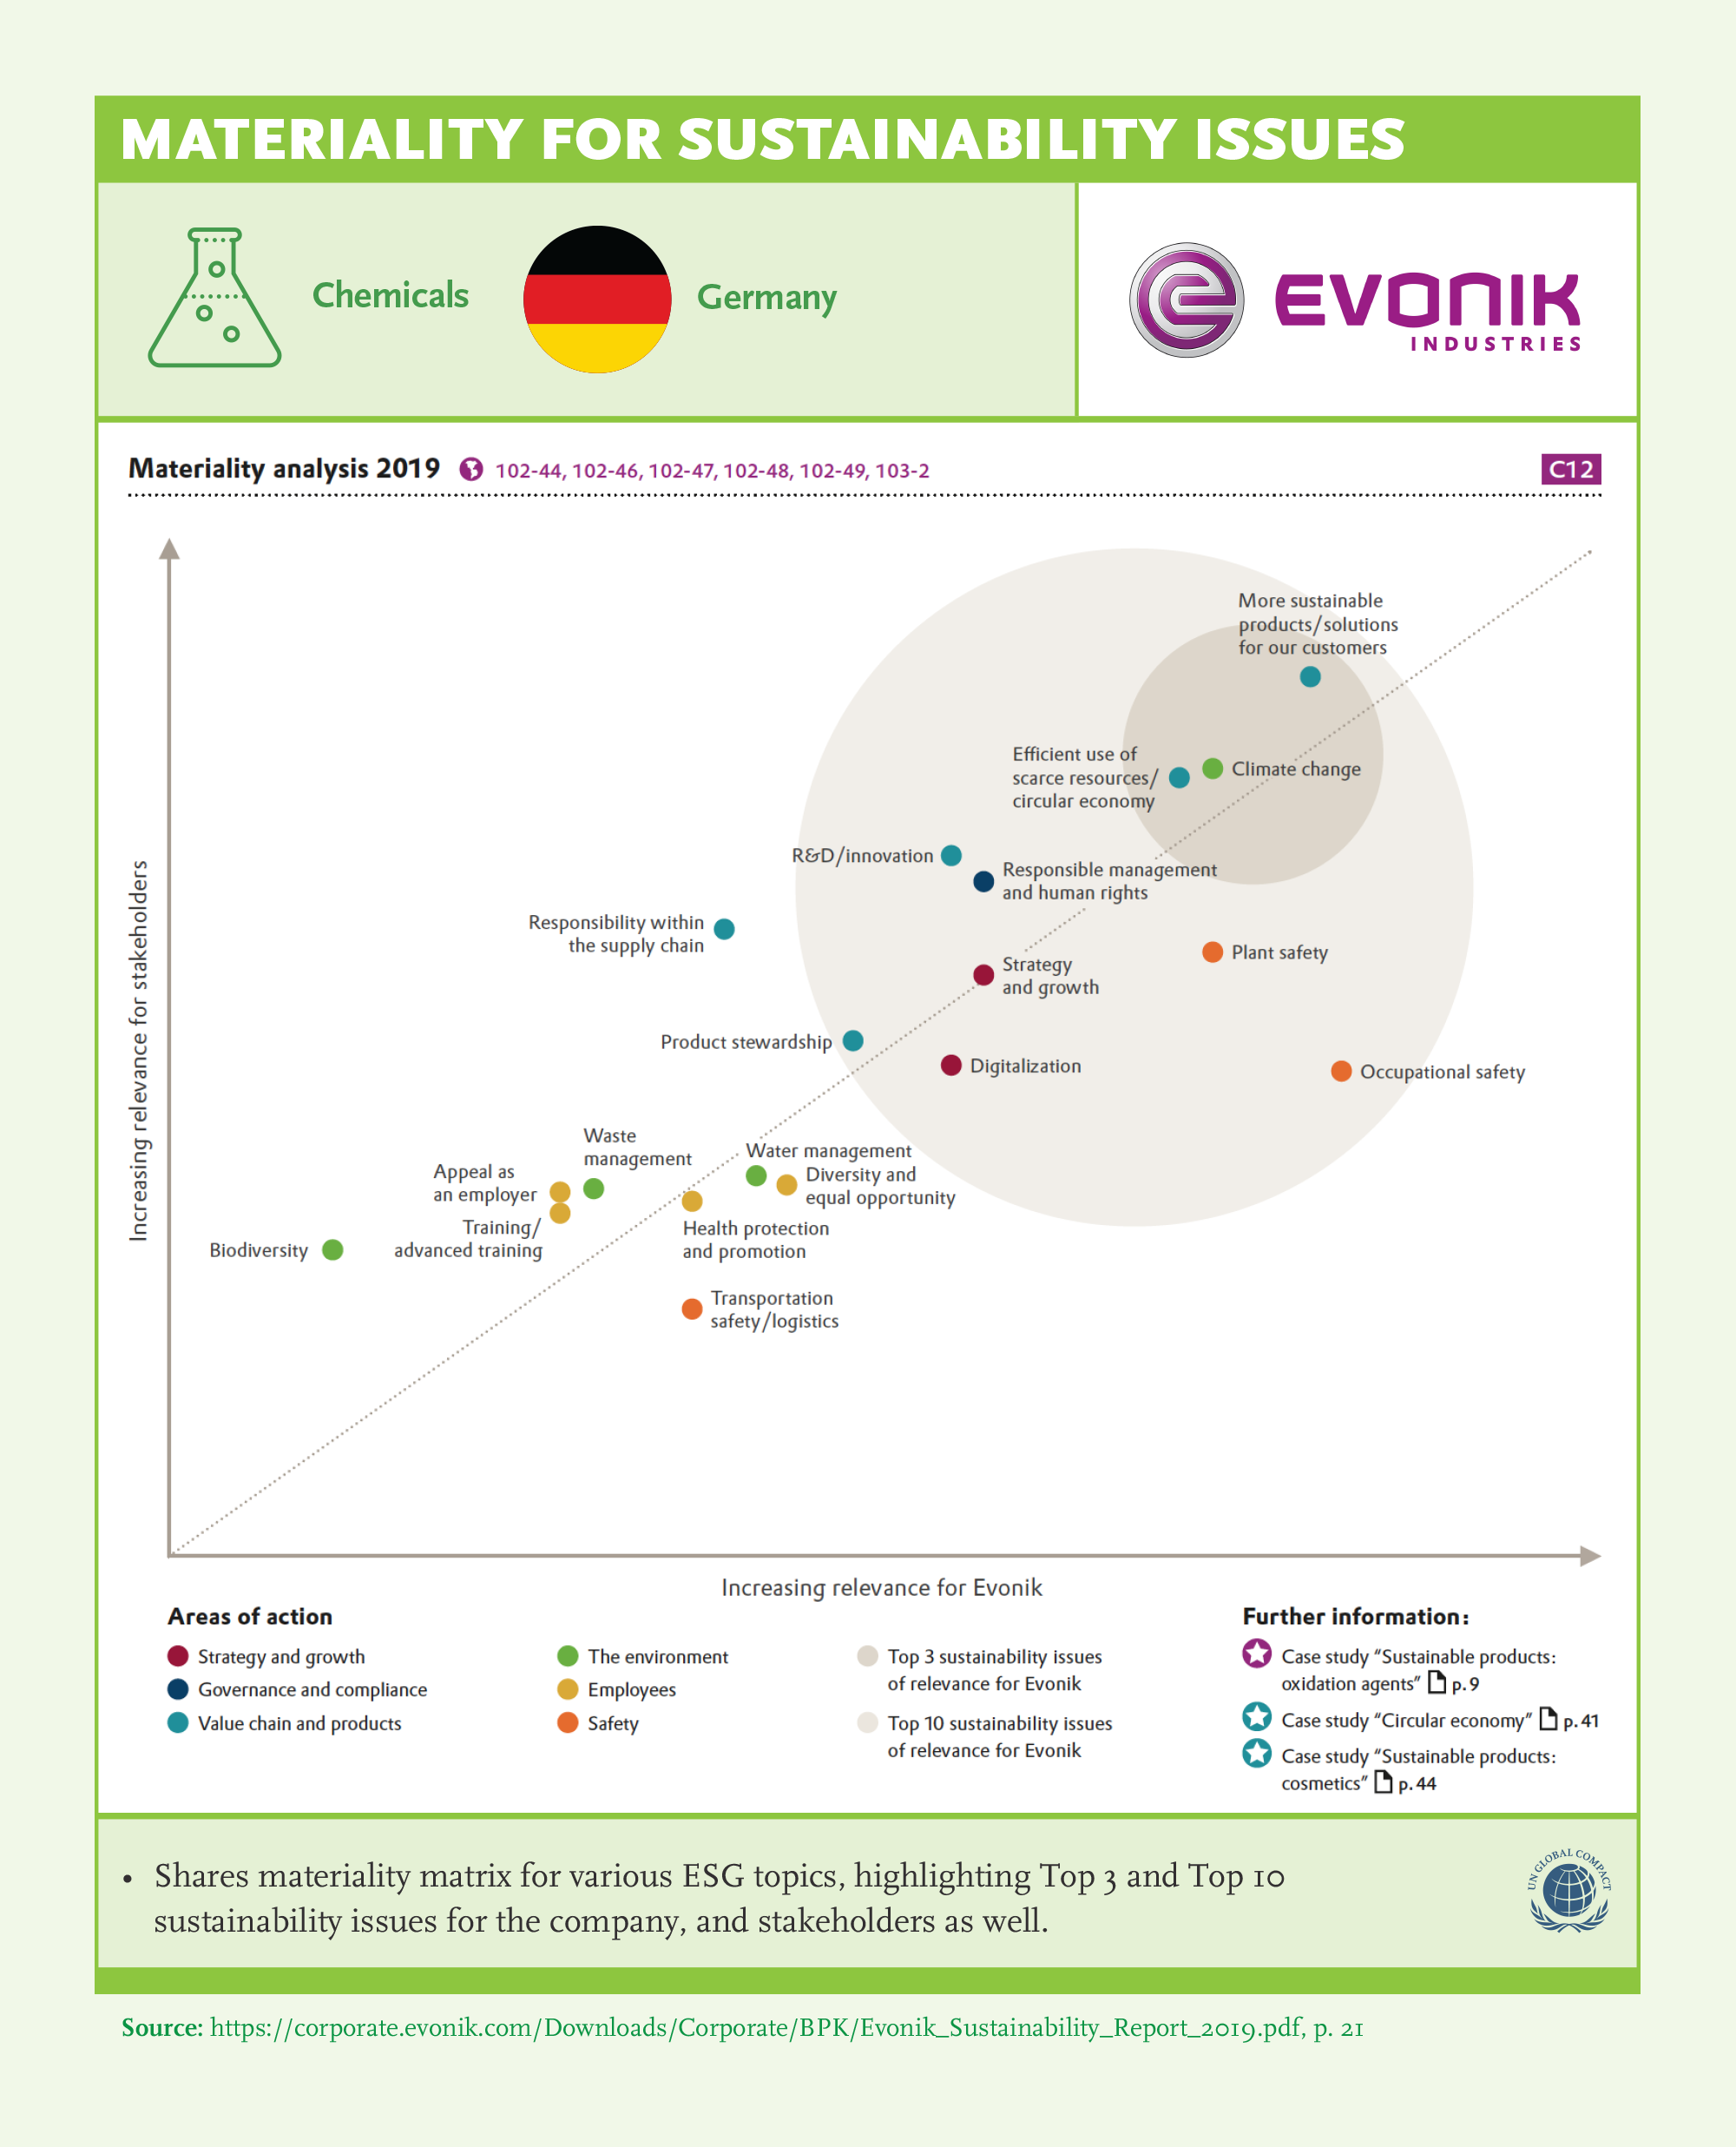 Materiality for Sustainability Issues: Evonik